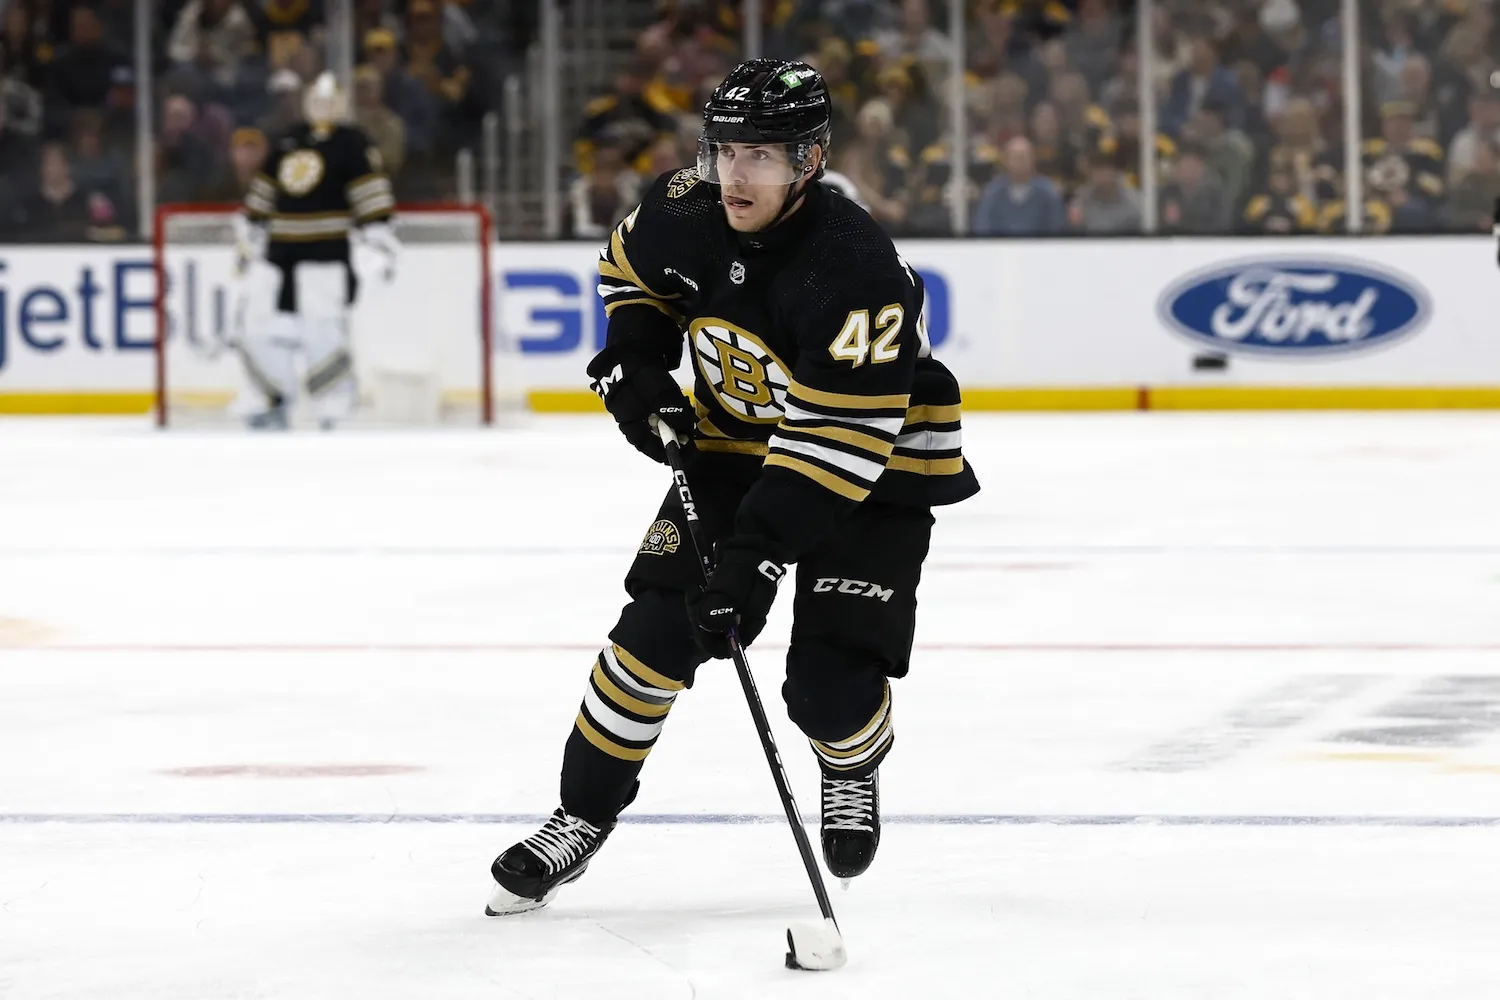 Dec 30, 2023; Boston, Massachusetts, USA; Boston Bruins center Georgii Merkulov (42) carries the puck in his first NHL game during the first period against the New Jersey Devils at TD Garden. Mandatory Credit: Winslow Townson-USA TODAY Sports